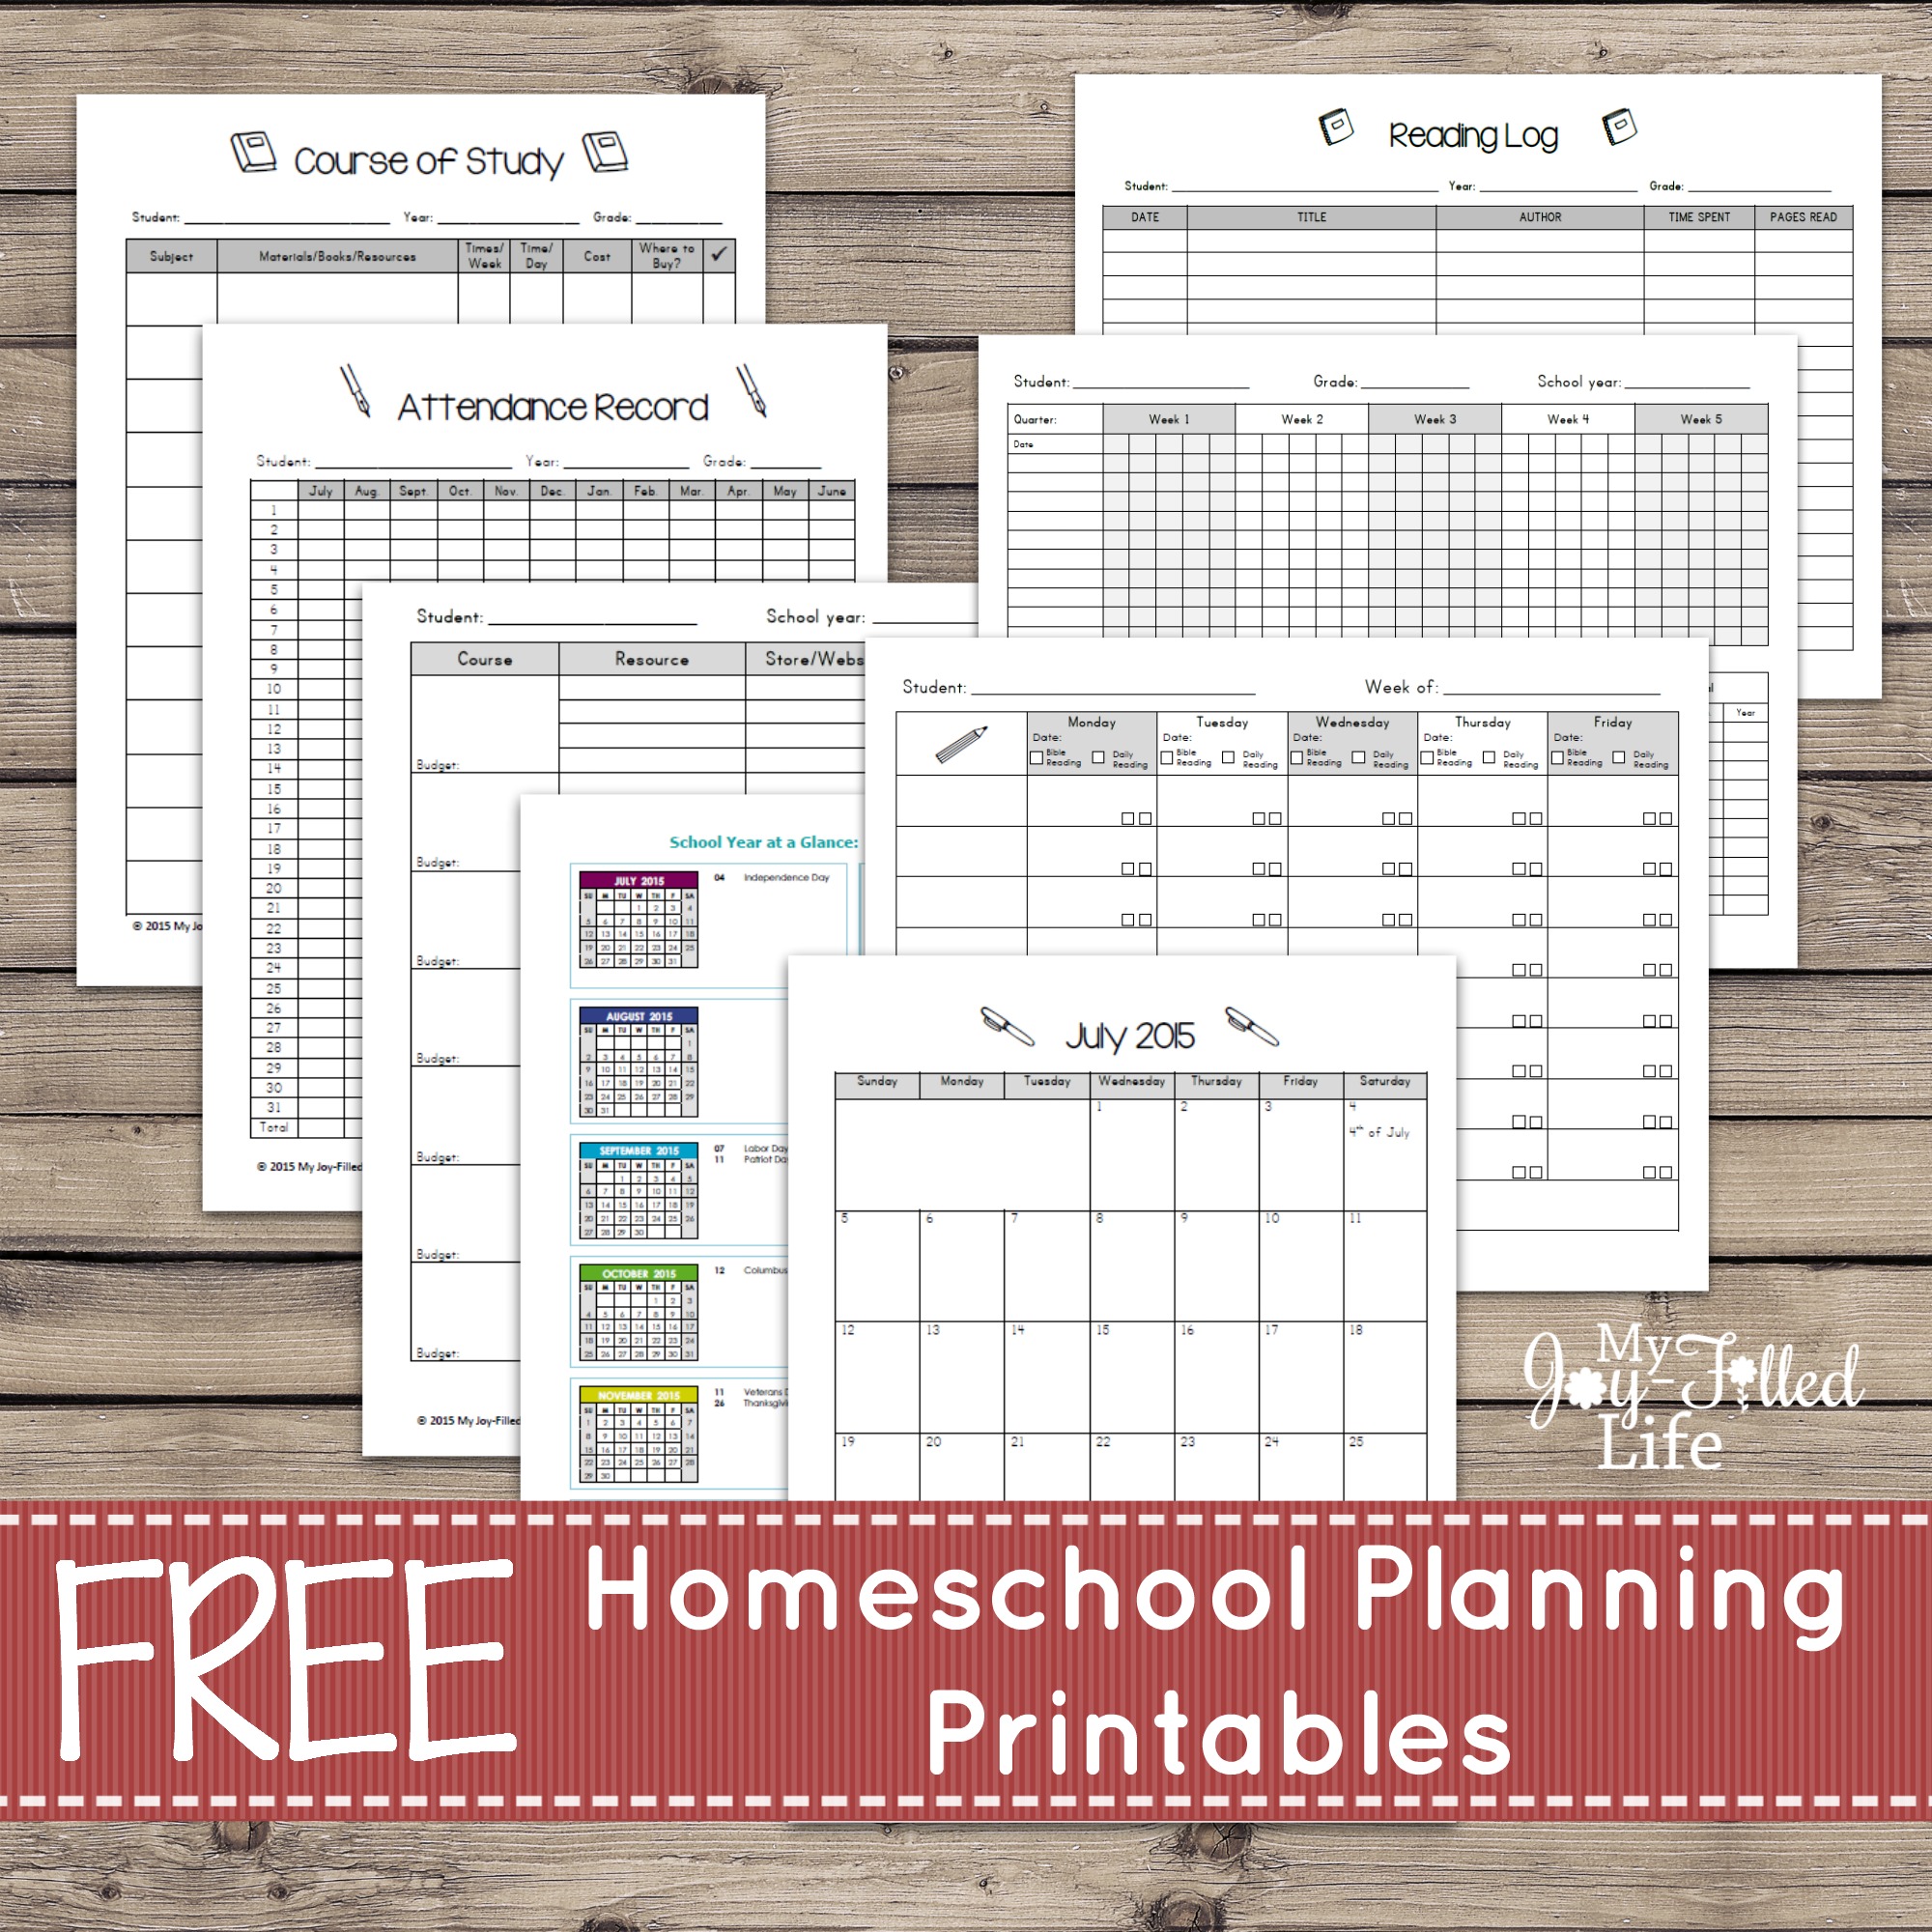 Download Homeschool Planning Resources Free Printable Planning Pages My Joy Filled Life